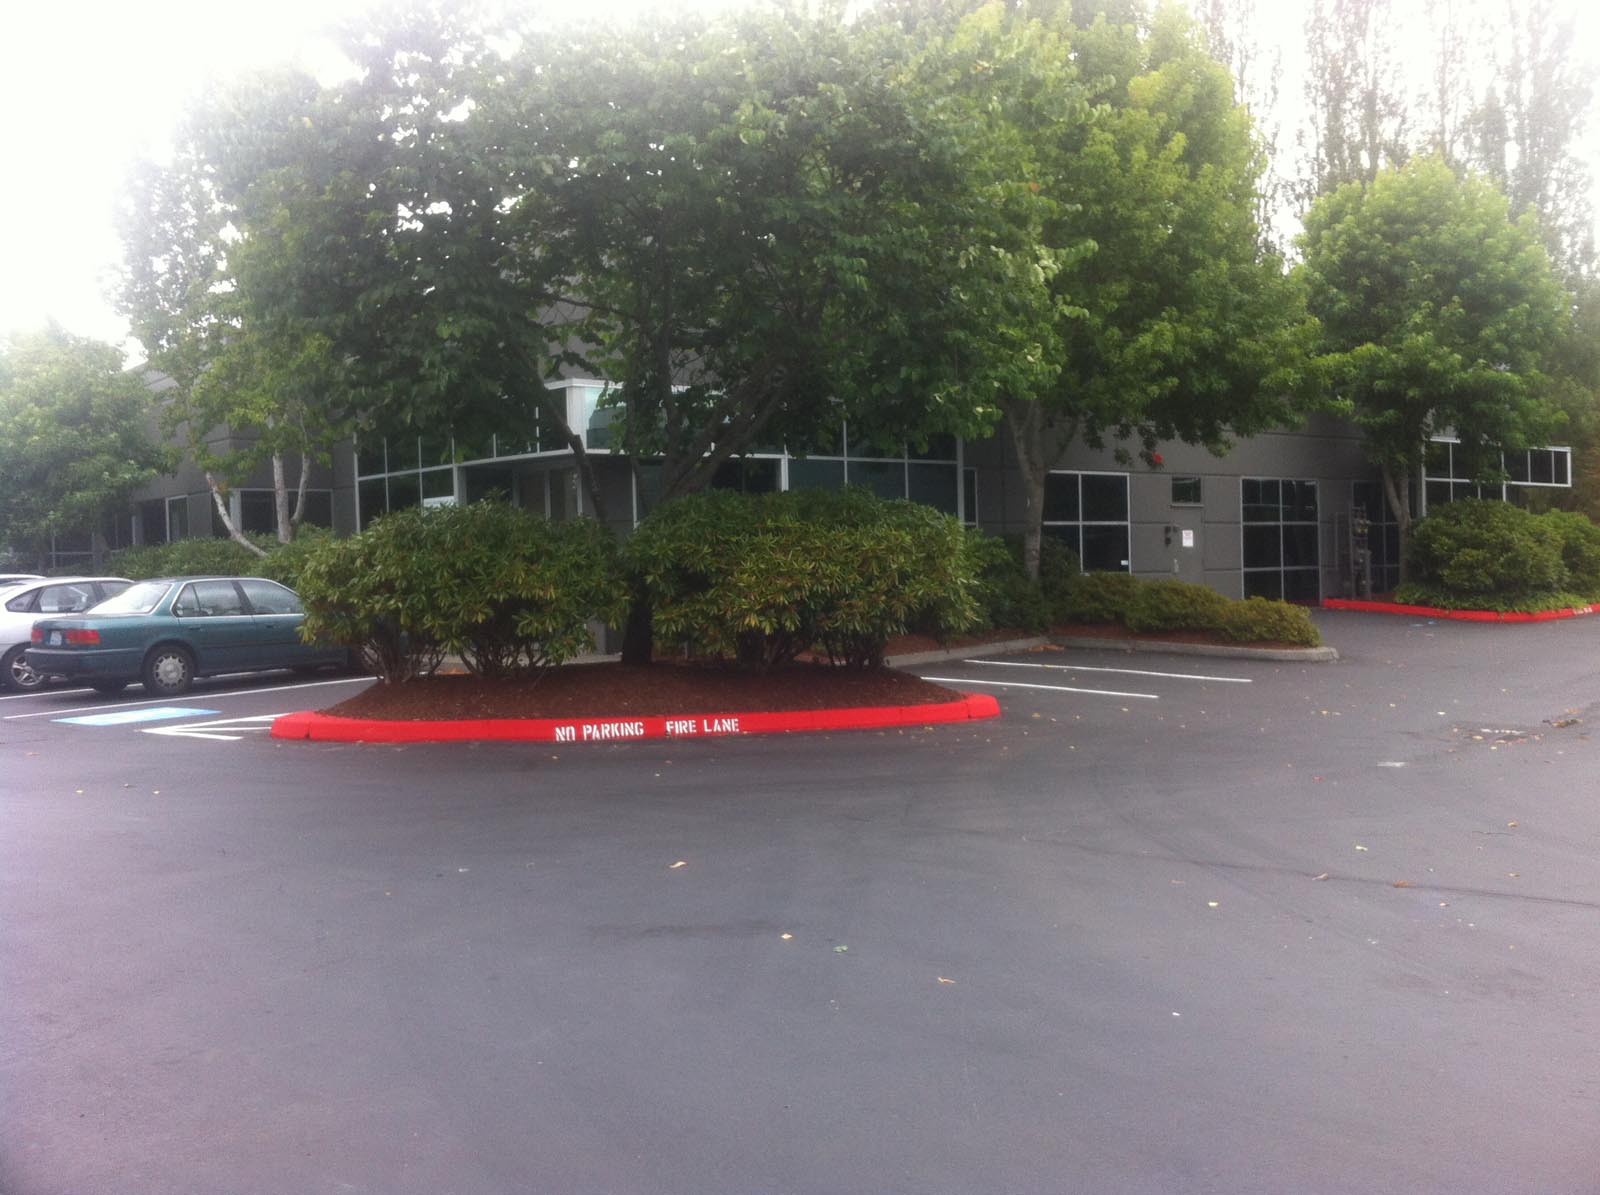 Woodinville Montessori parking lot and trees